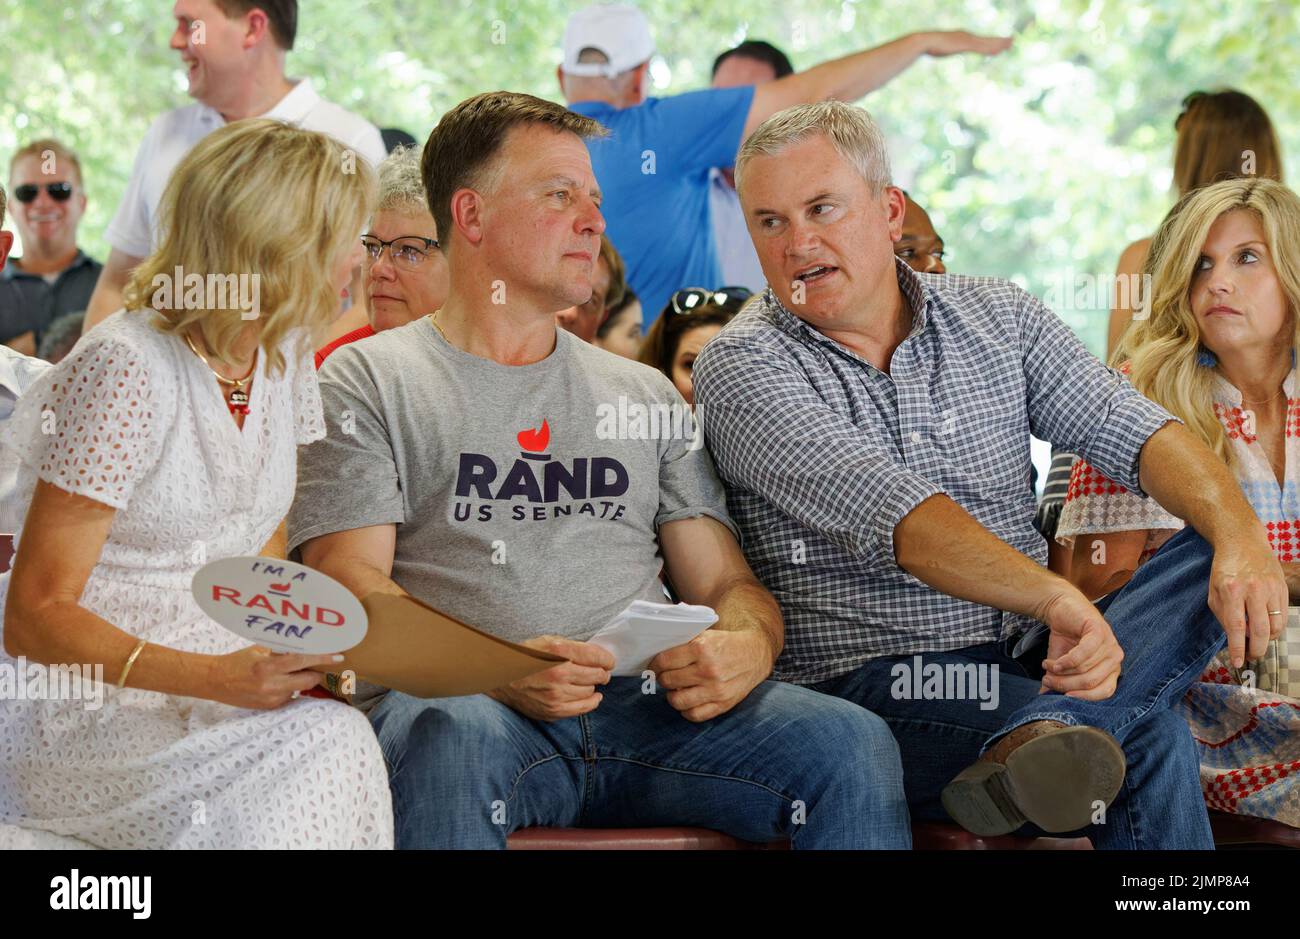 Fancy Farm, KY, USA. 06 Aug 2022. Republican Congressman James Comer (second from right) talks with Kelley Paul (left) and Rob Givens, state director for Sen. Rand Paul, as his wife, Tamara Comer (right), looks on during the 142nd St. Jerome Fancy Farm Picnic. A fundraiser for St. Jerome Catholic Church, the picnic is known for serving tons of barbecued meats and inviting political speakers to poke fun at one another in front of a crowd that's both permitted and encouraged to heckle. (Credit: Billy Suratt/Apex MediaWire via Alamy Live News) Stock Photo